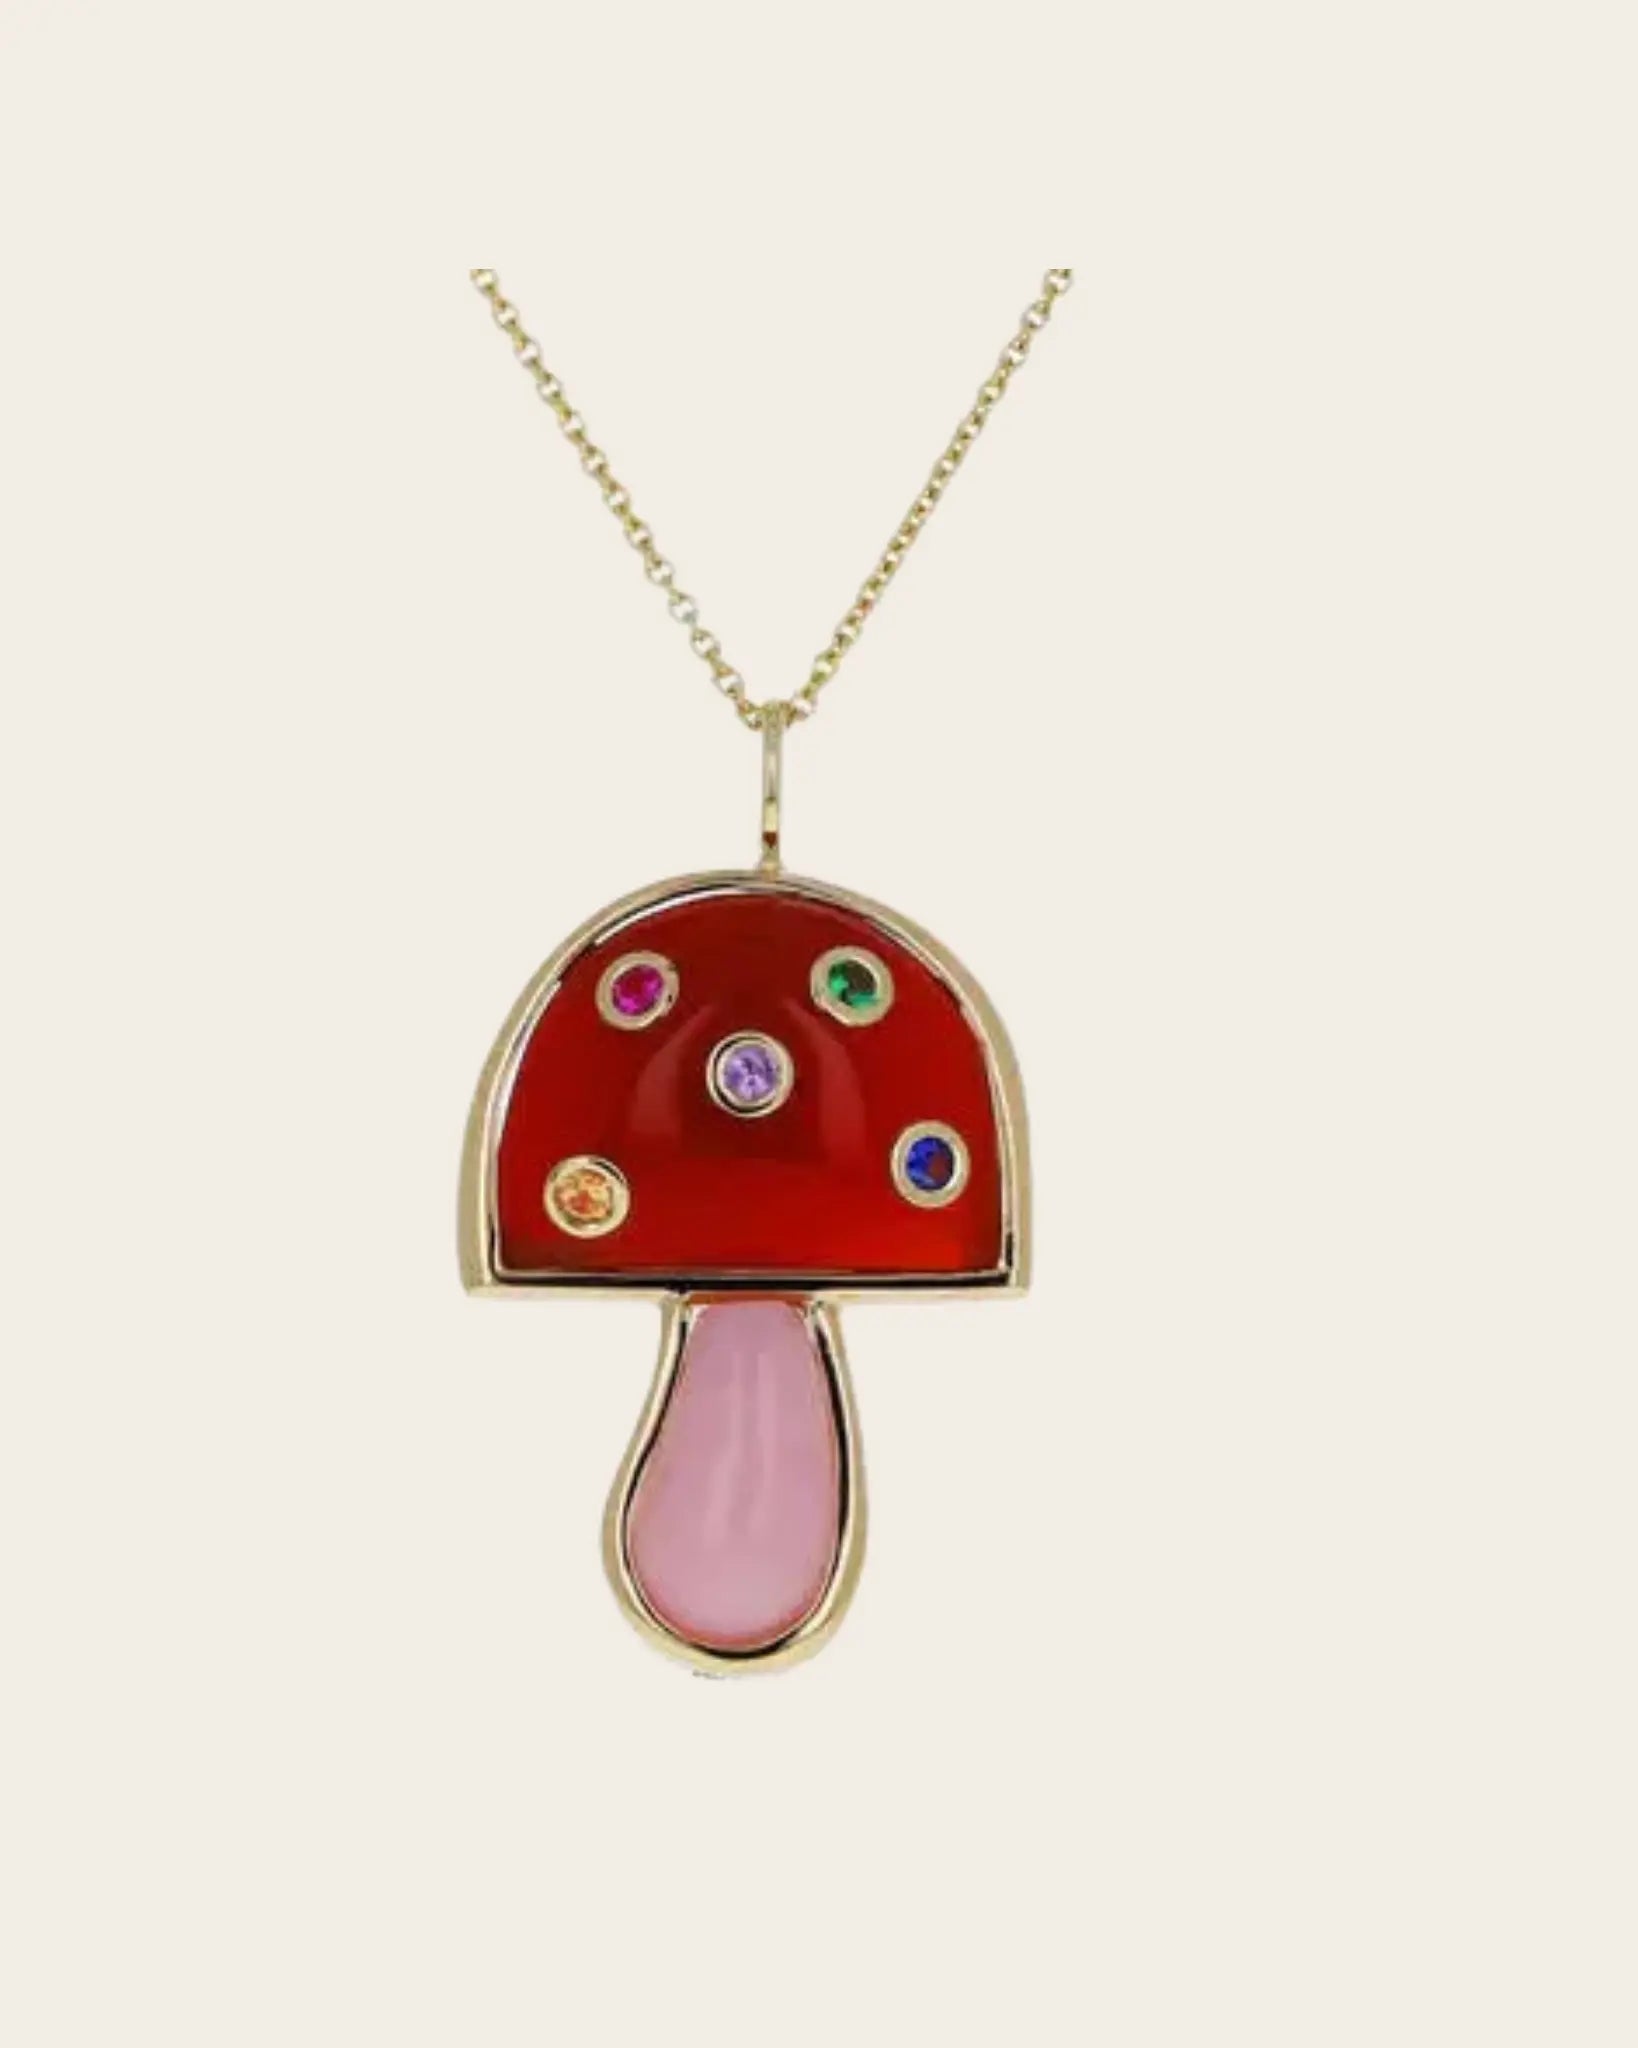 Brent Neale Carnelian, Pink Opal and Multi-Colored Sapphire Mini Mushroom Necklace Brent Neale Carnelian, Pink Opal and Multi-Colored Sapphire Mini Mushroom Necklace Brent Neale Brent Neale  Squash Blossom Vail